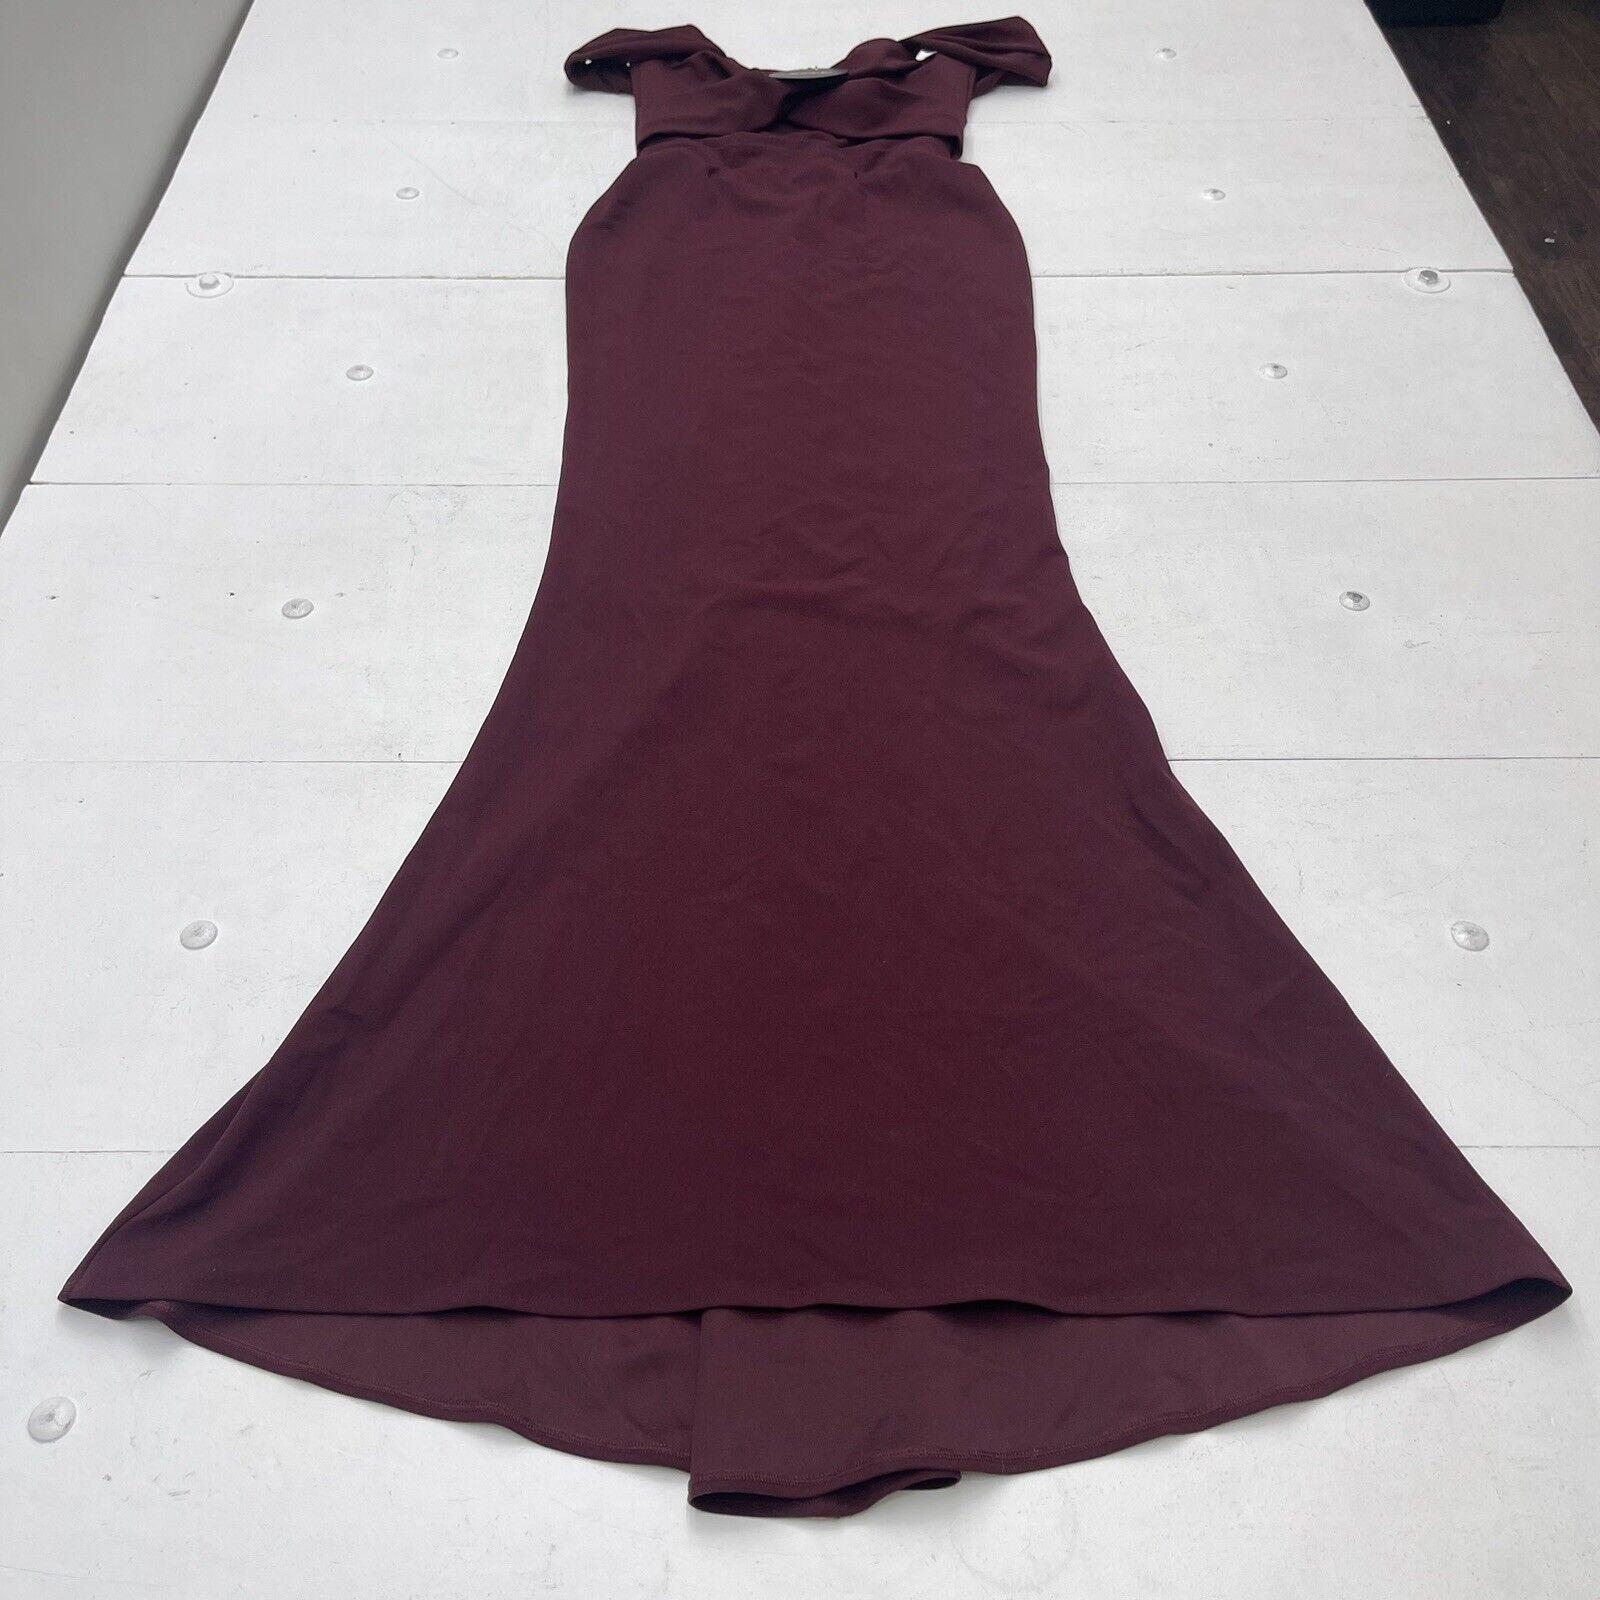 Nookie Camille Wine Red Off The Shoulder Gown Women’s Medium New Defect